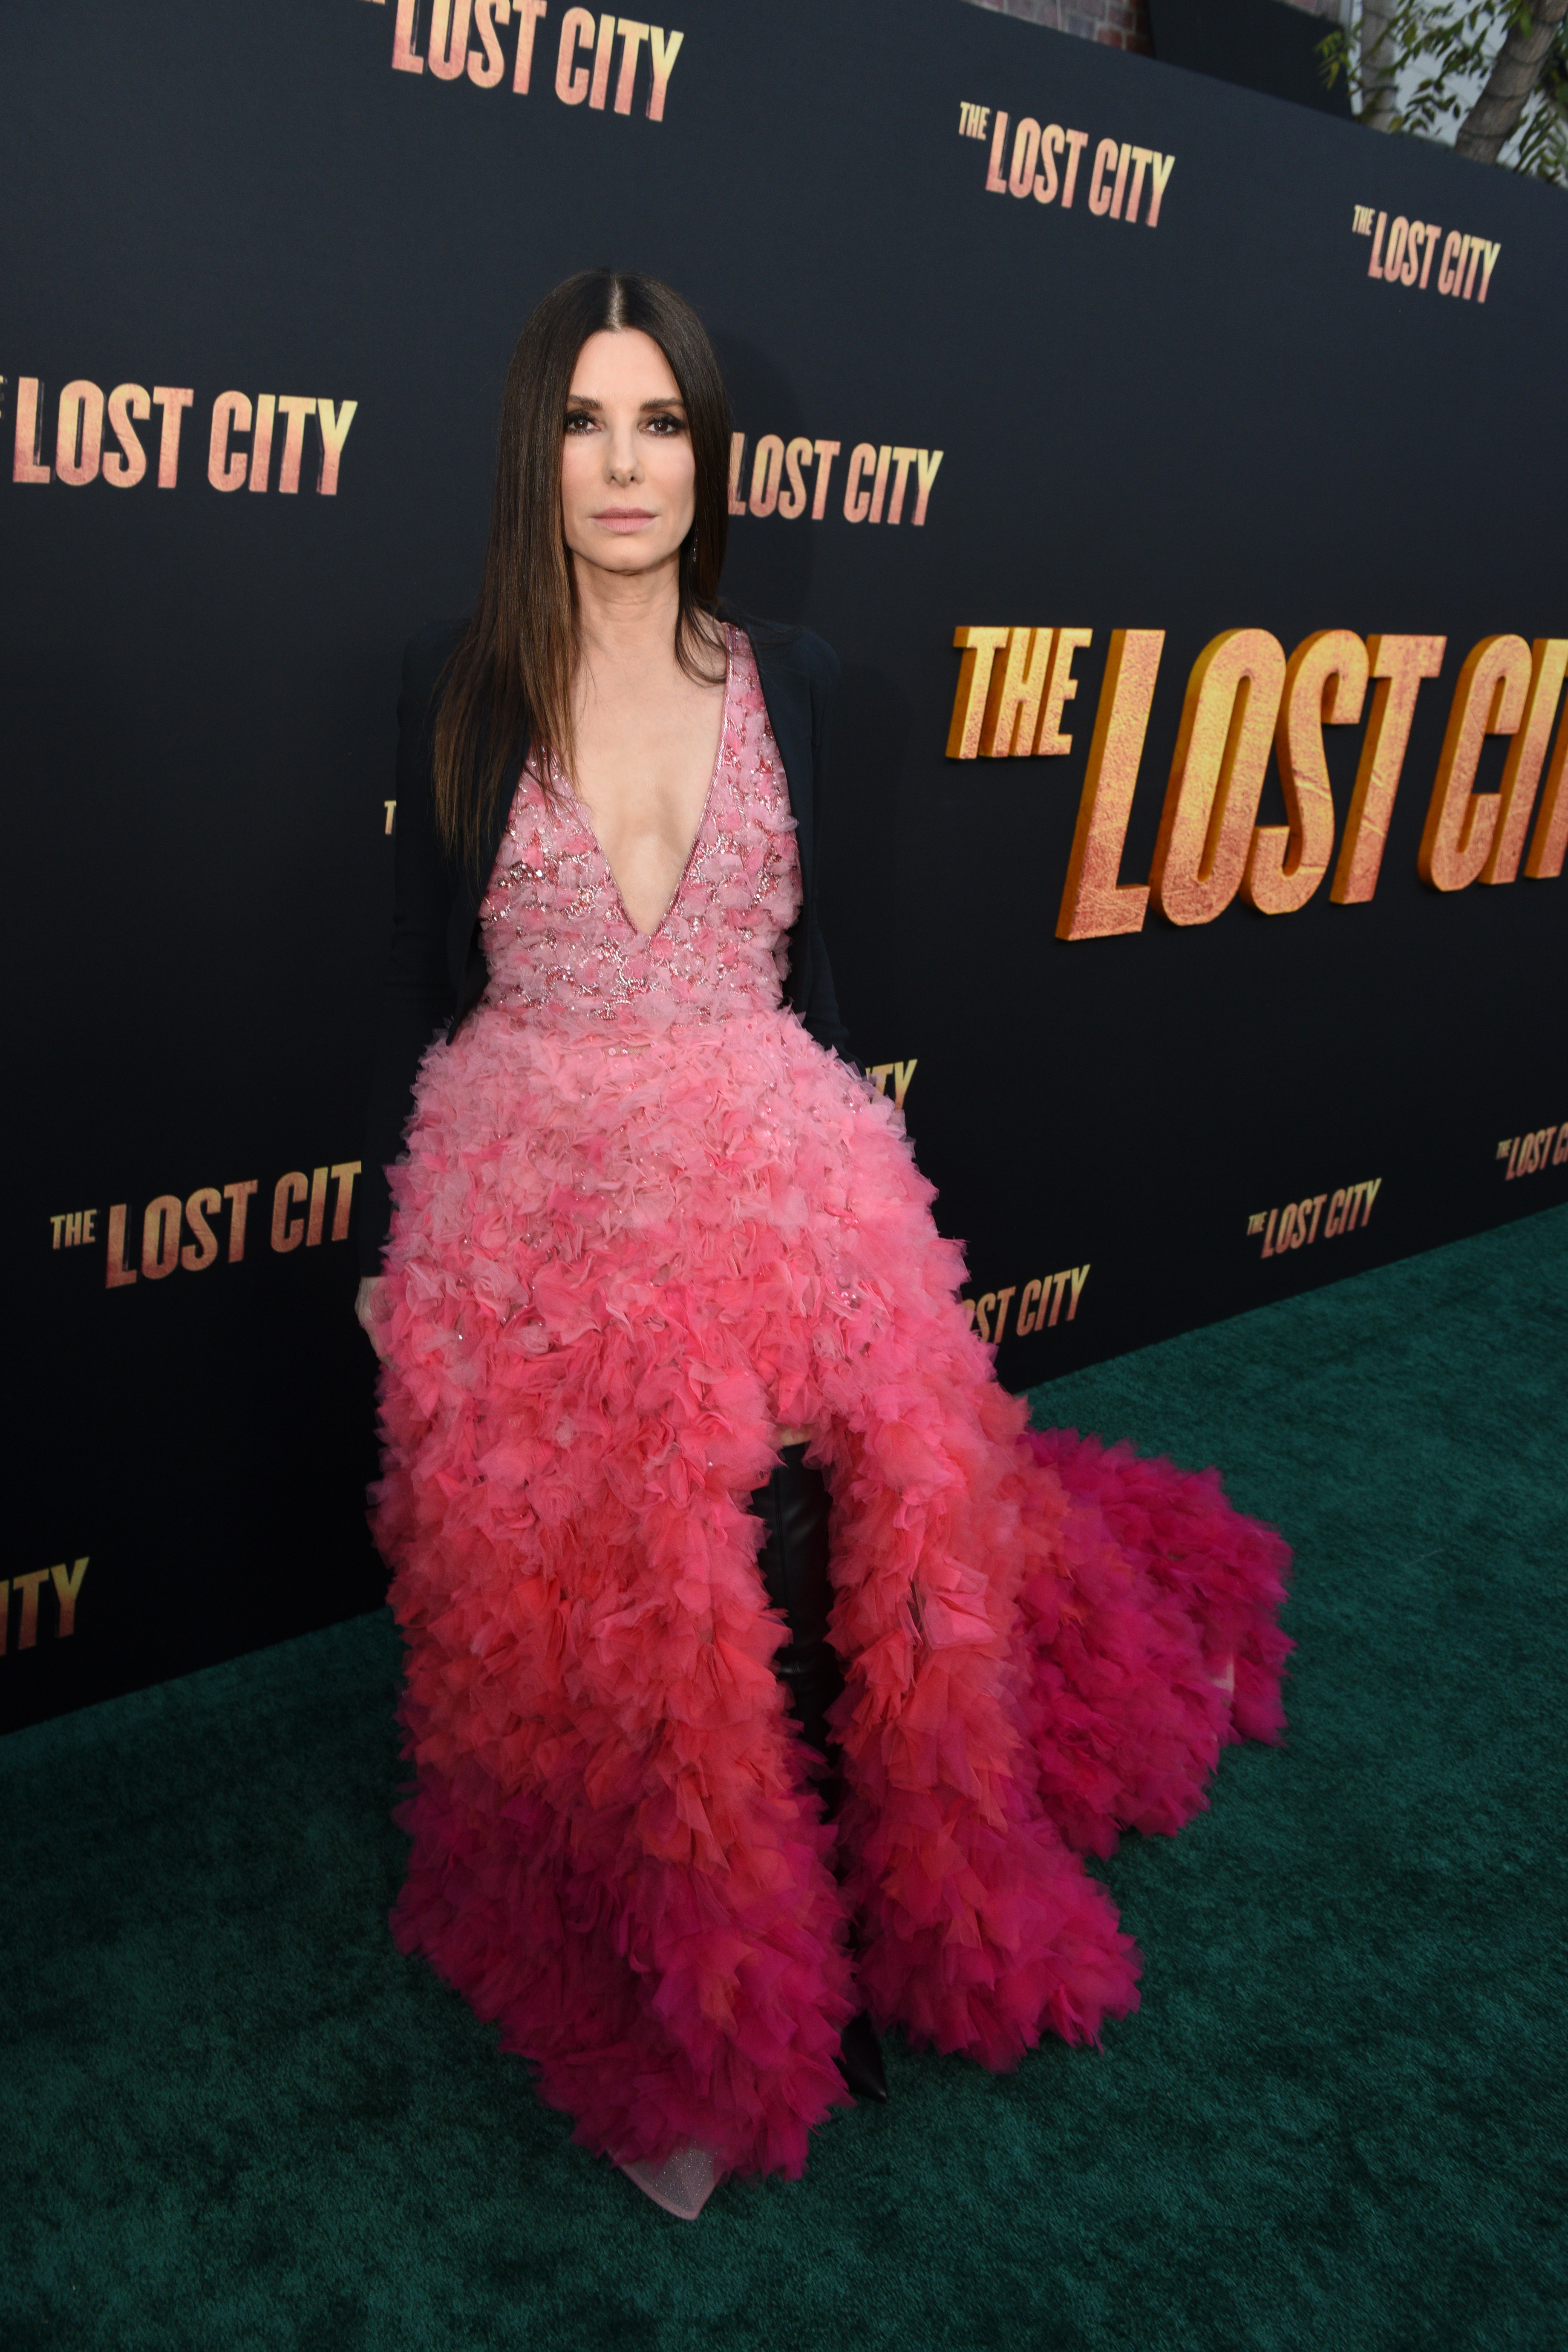 Sandra Bullock attends the Los Angeles premiere of 'The Lost City' at Regency Village Theatre on March 21, 2022 in Los Angeles, California | Source: Getty Images